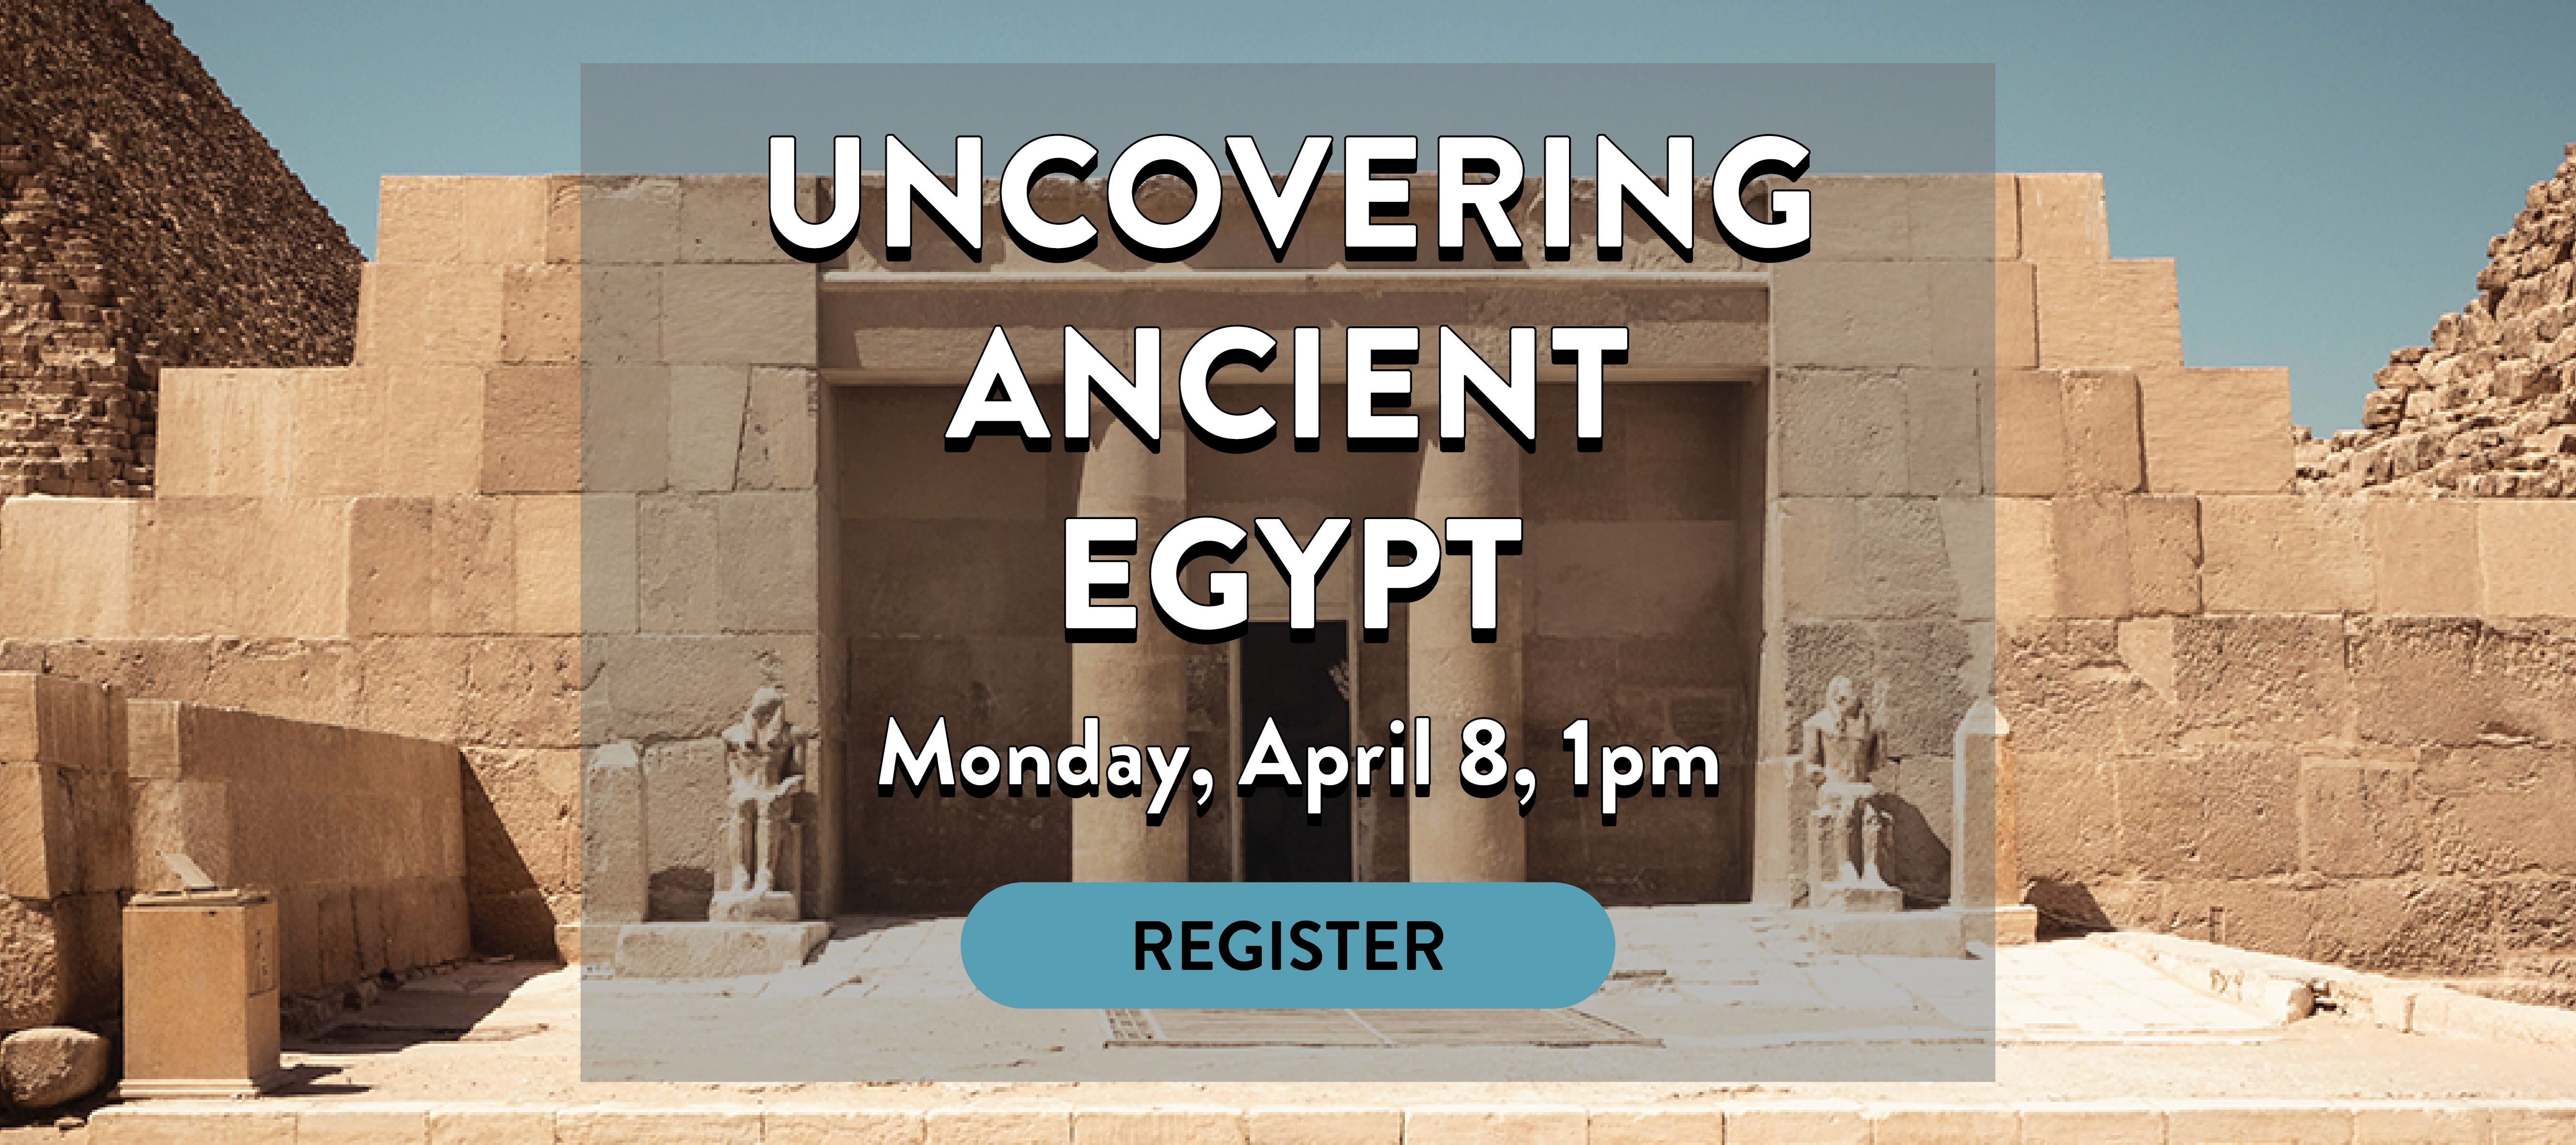 phpl, Prospect Heights Public Library, Uncovering Ancient Egypt, Adult